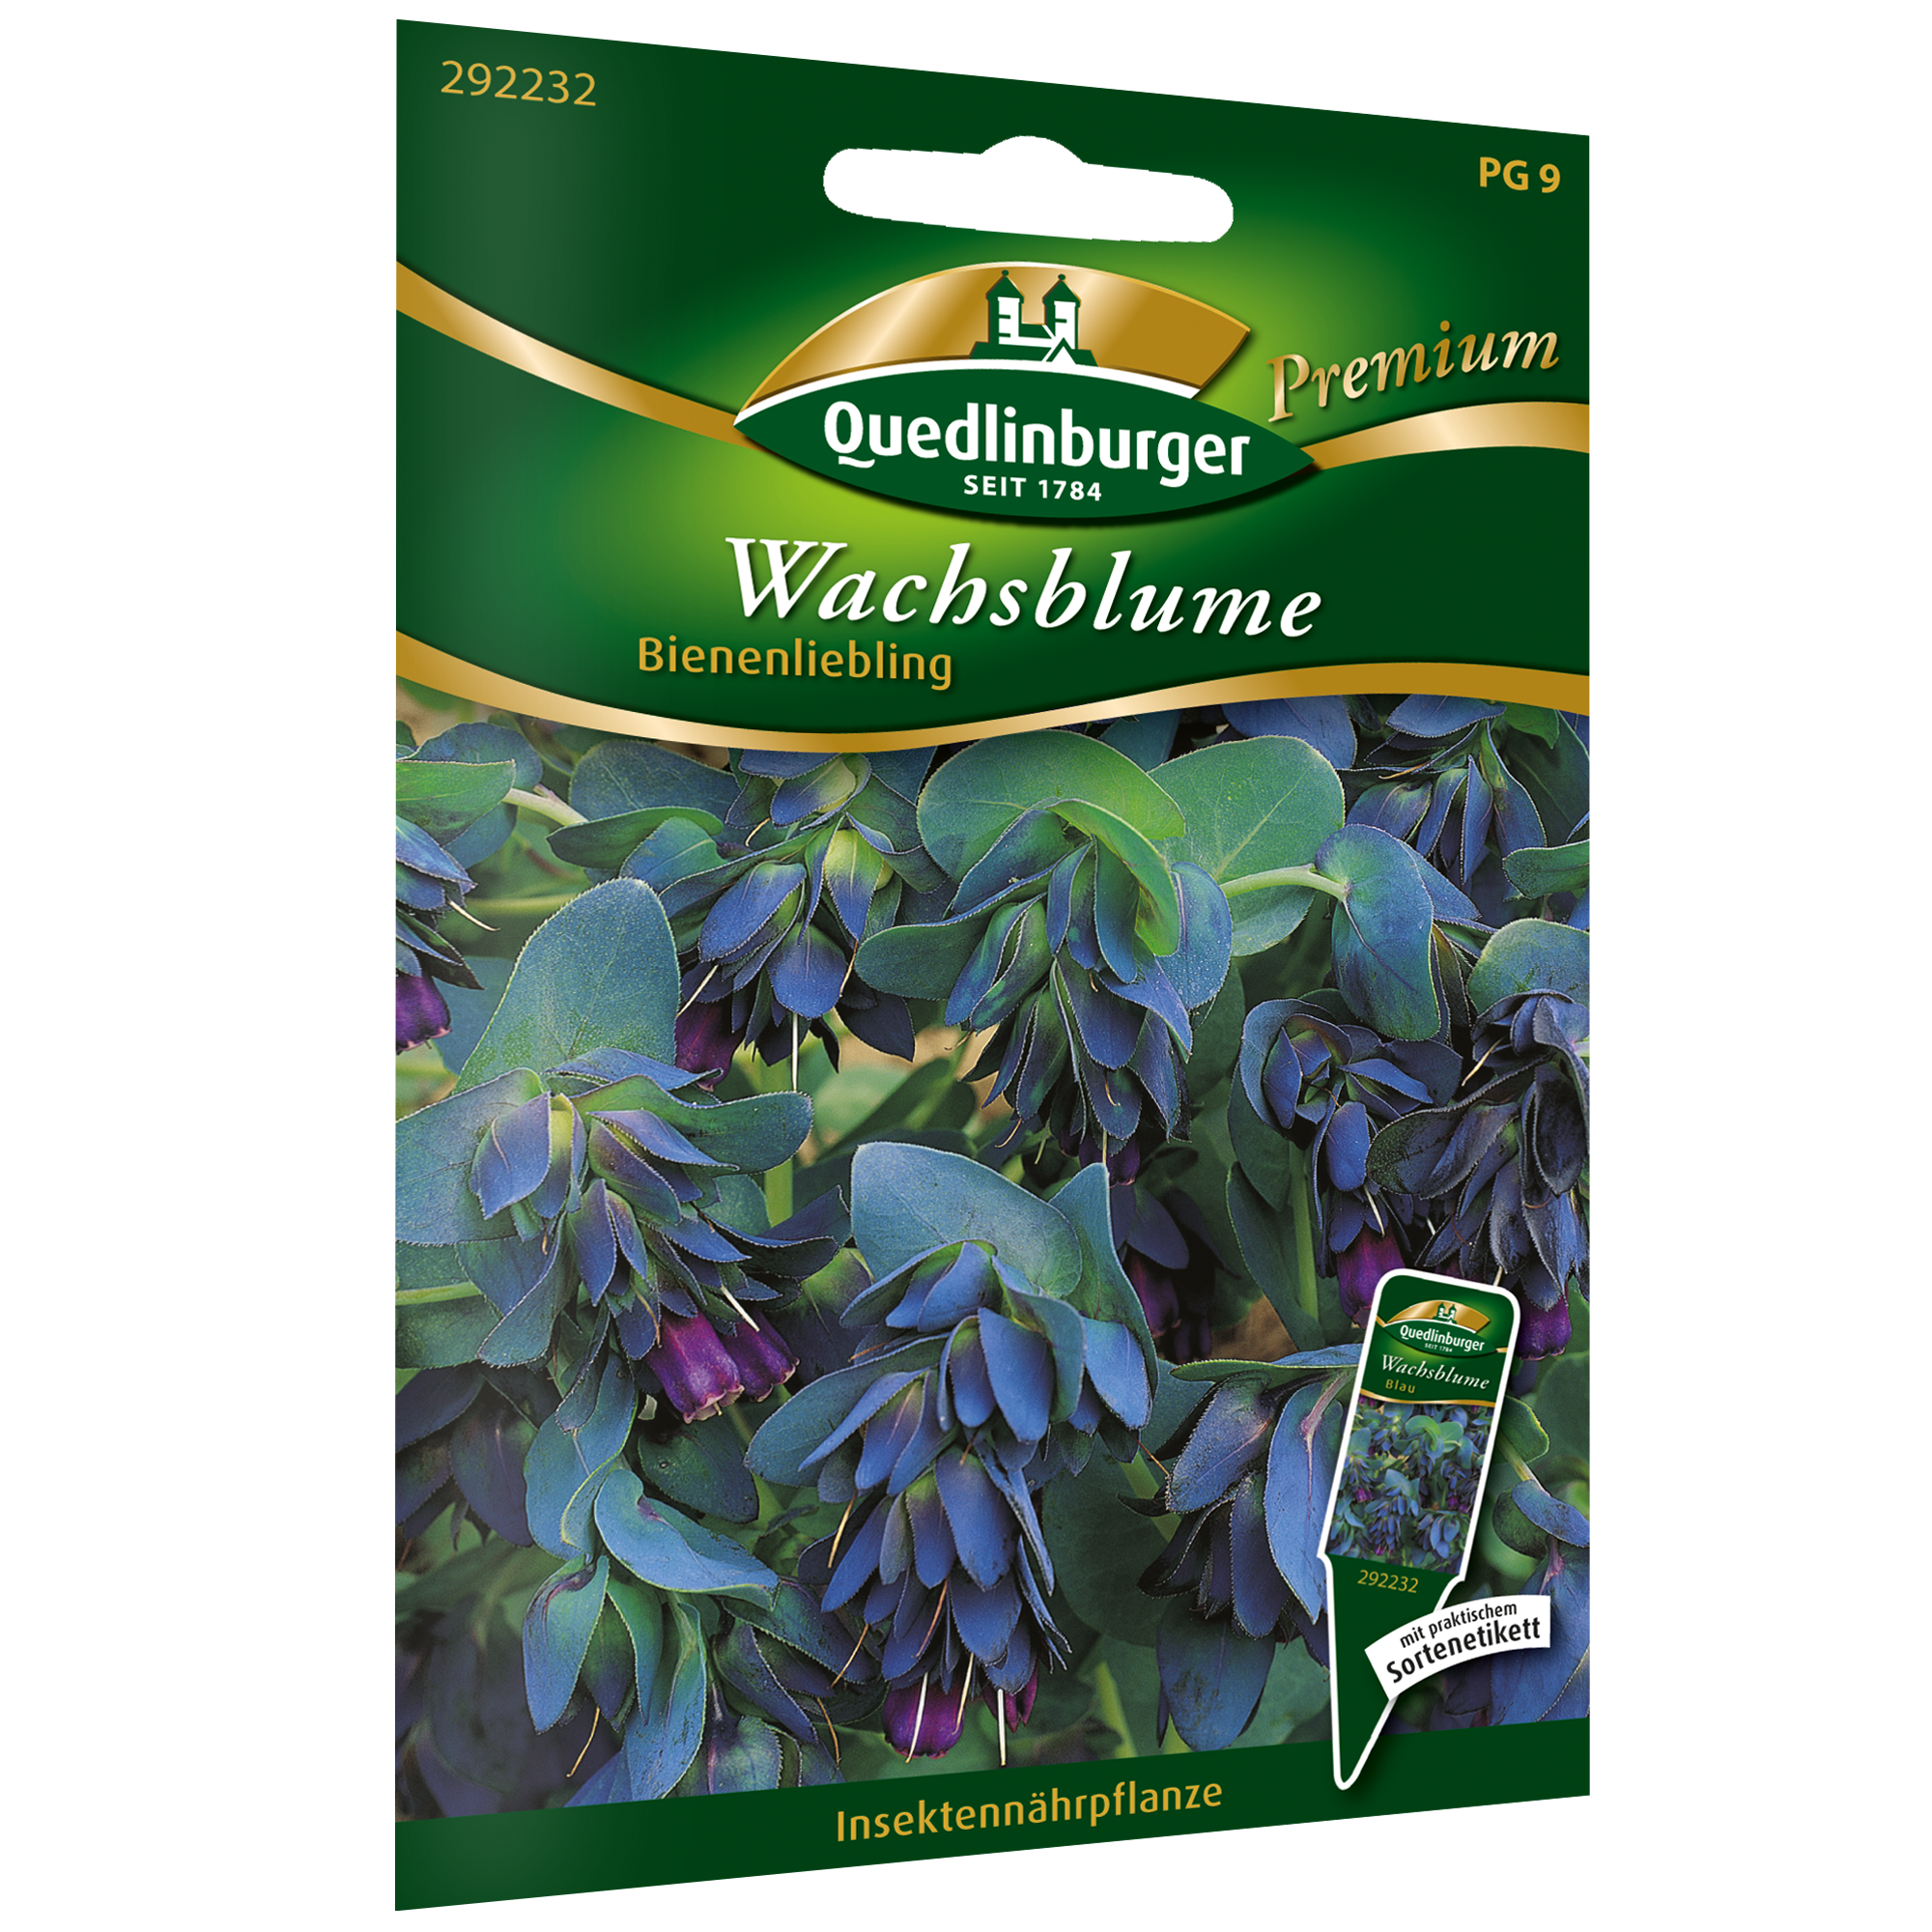 Wachsblume 'Bienenliebling' + product picture